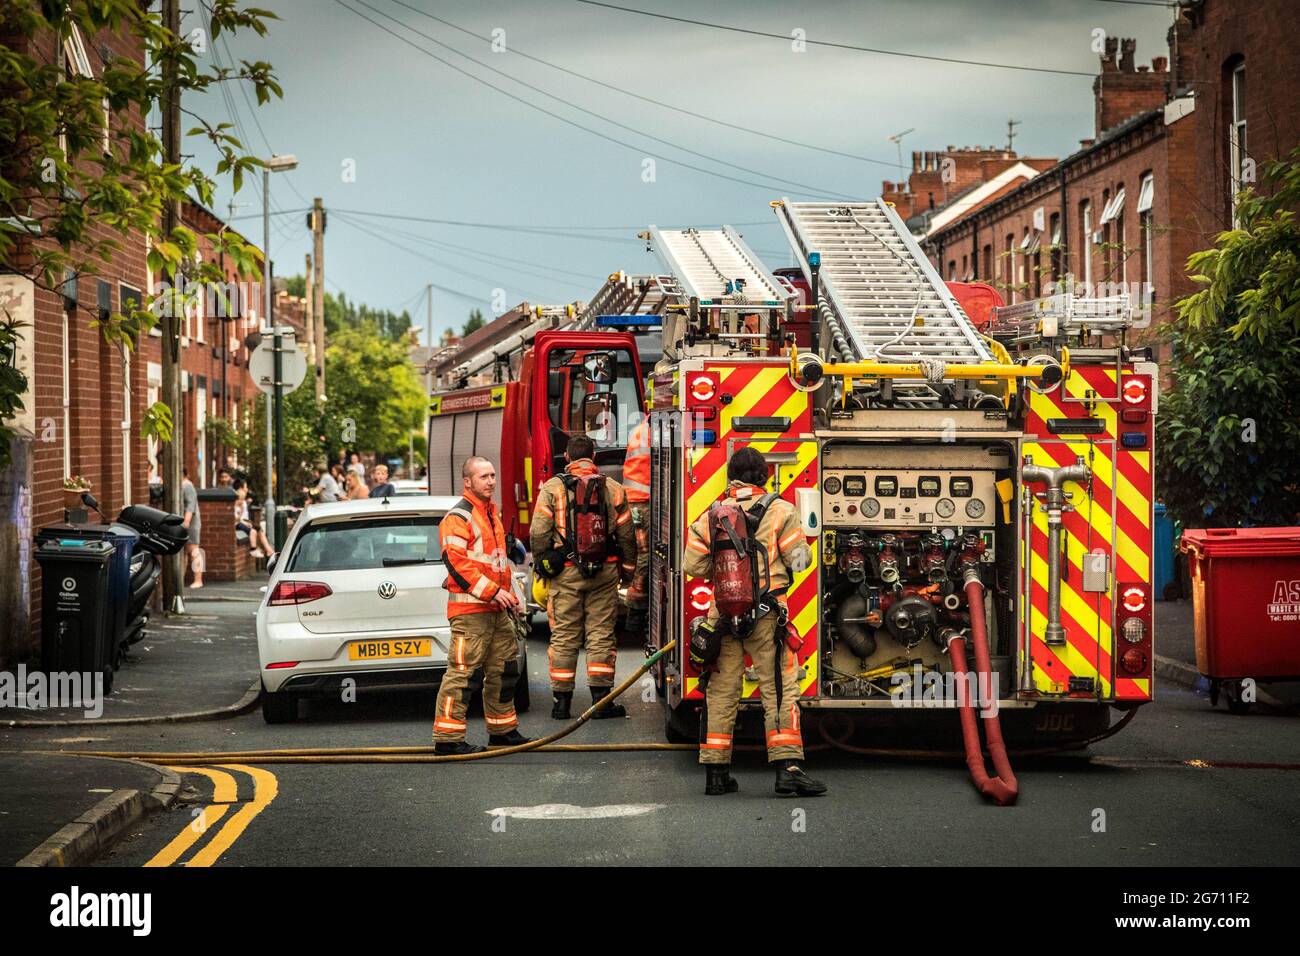 Manchester, UK. 09th July, 2021. Firefighters control the pump for the water at the firefighting truck.Greater Manchester Fire Service block off Norman Street, Failsworth after a house fire in a flat on Manchester Road. Residents say the house fire was caused by a man who wanted to commit suicide however conflicting reports also came me that the man was cooking. Two fire trucks and a fire commander responded to the scene. Credit: SOPA Images Limited/Alamy Live News Stock Photo